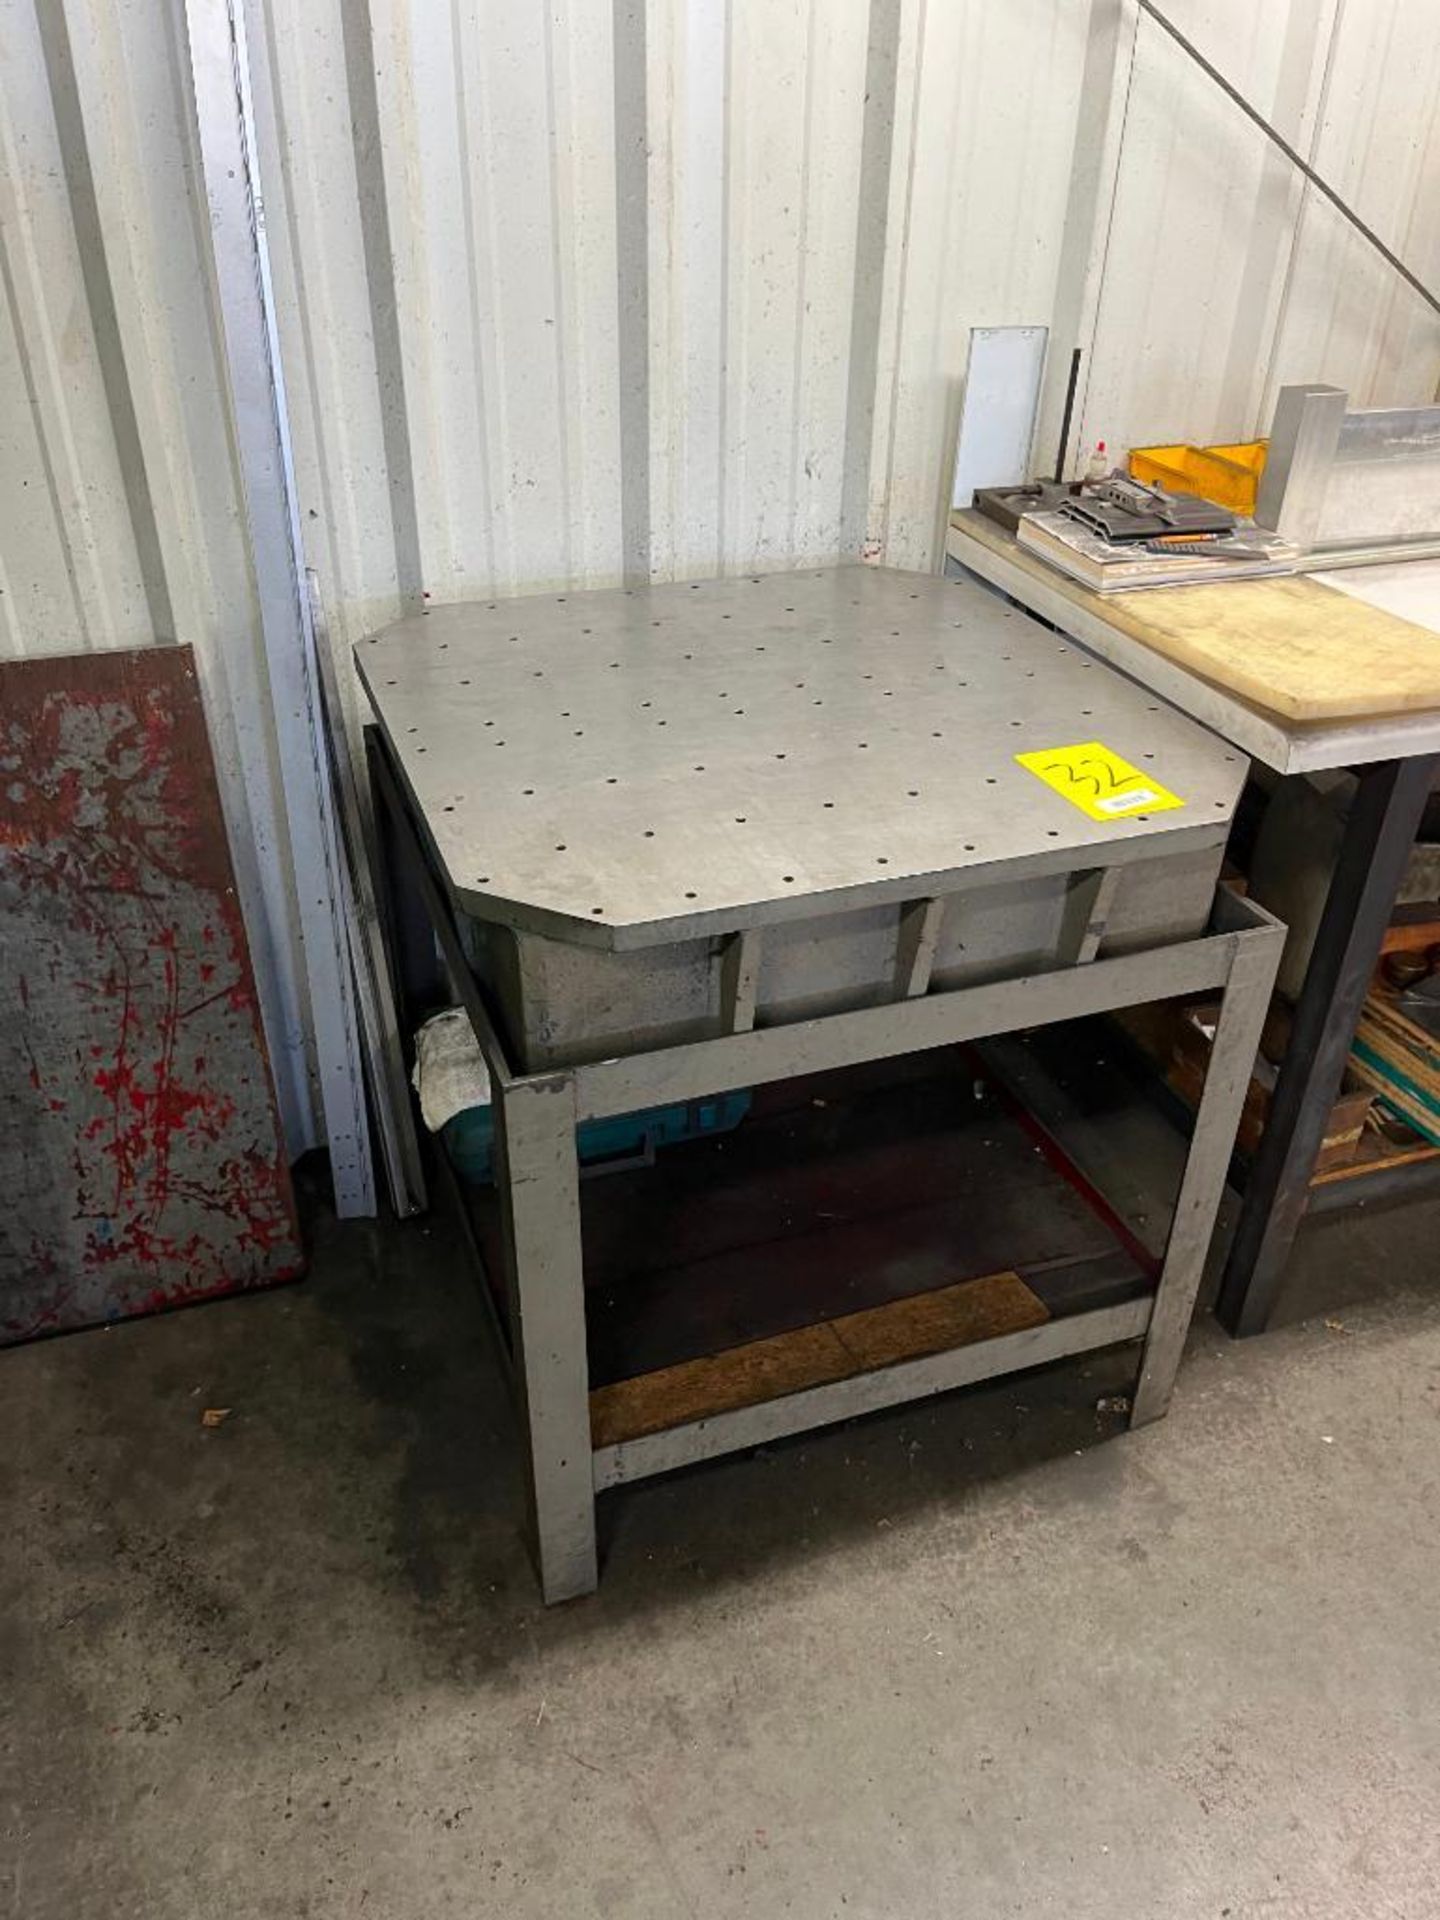 Steel Precision surface plate, 32" x 32" x 8"